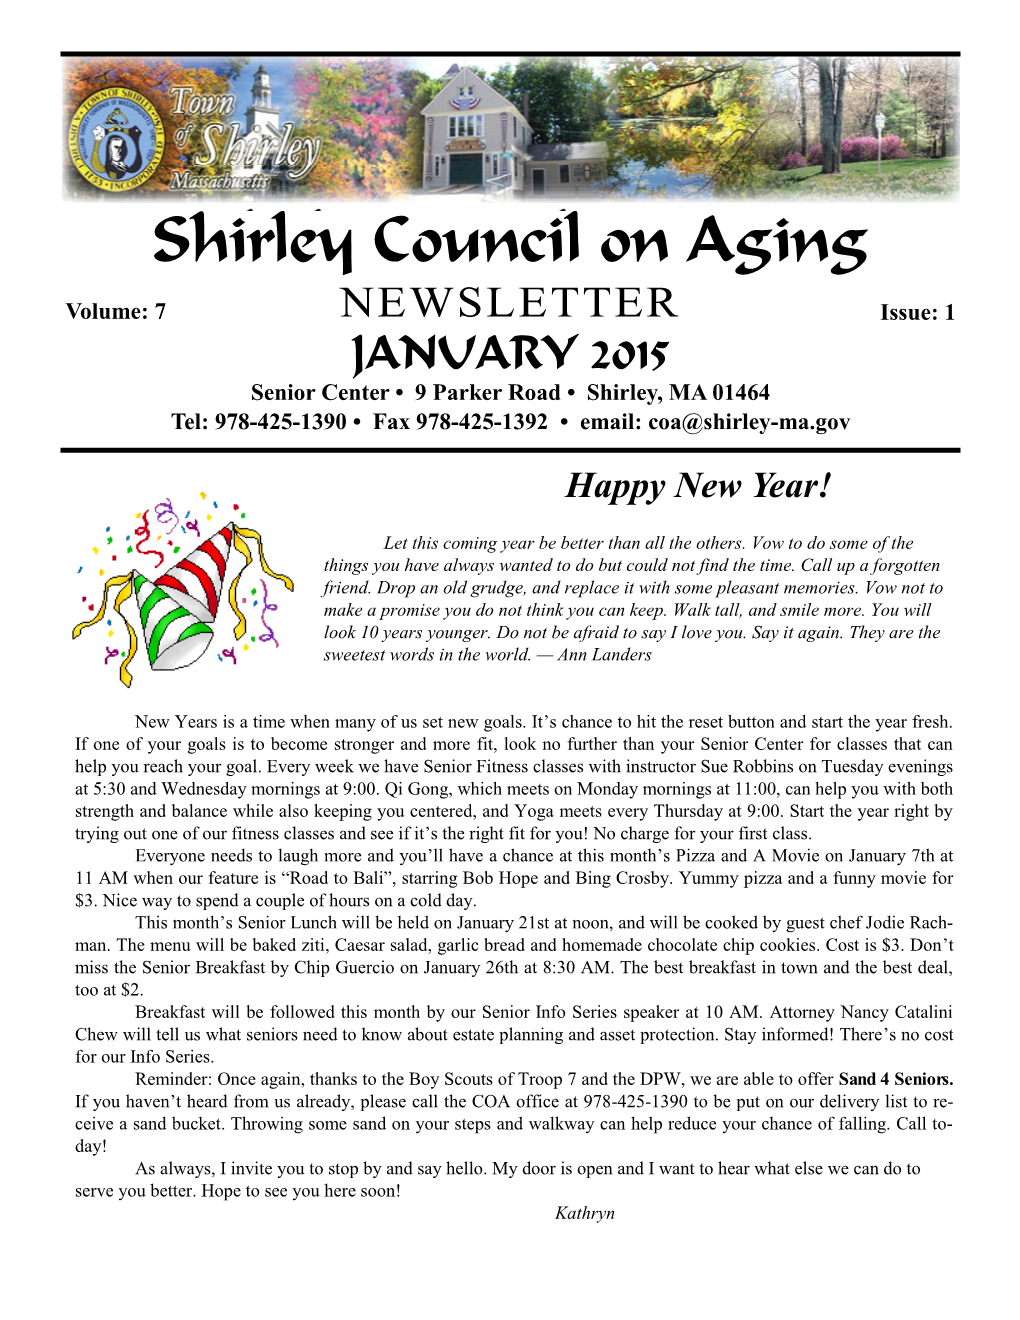 Shirley Council on Aging